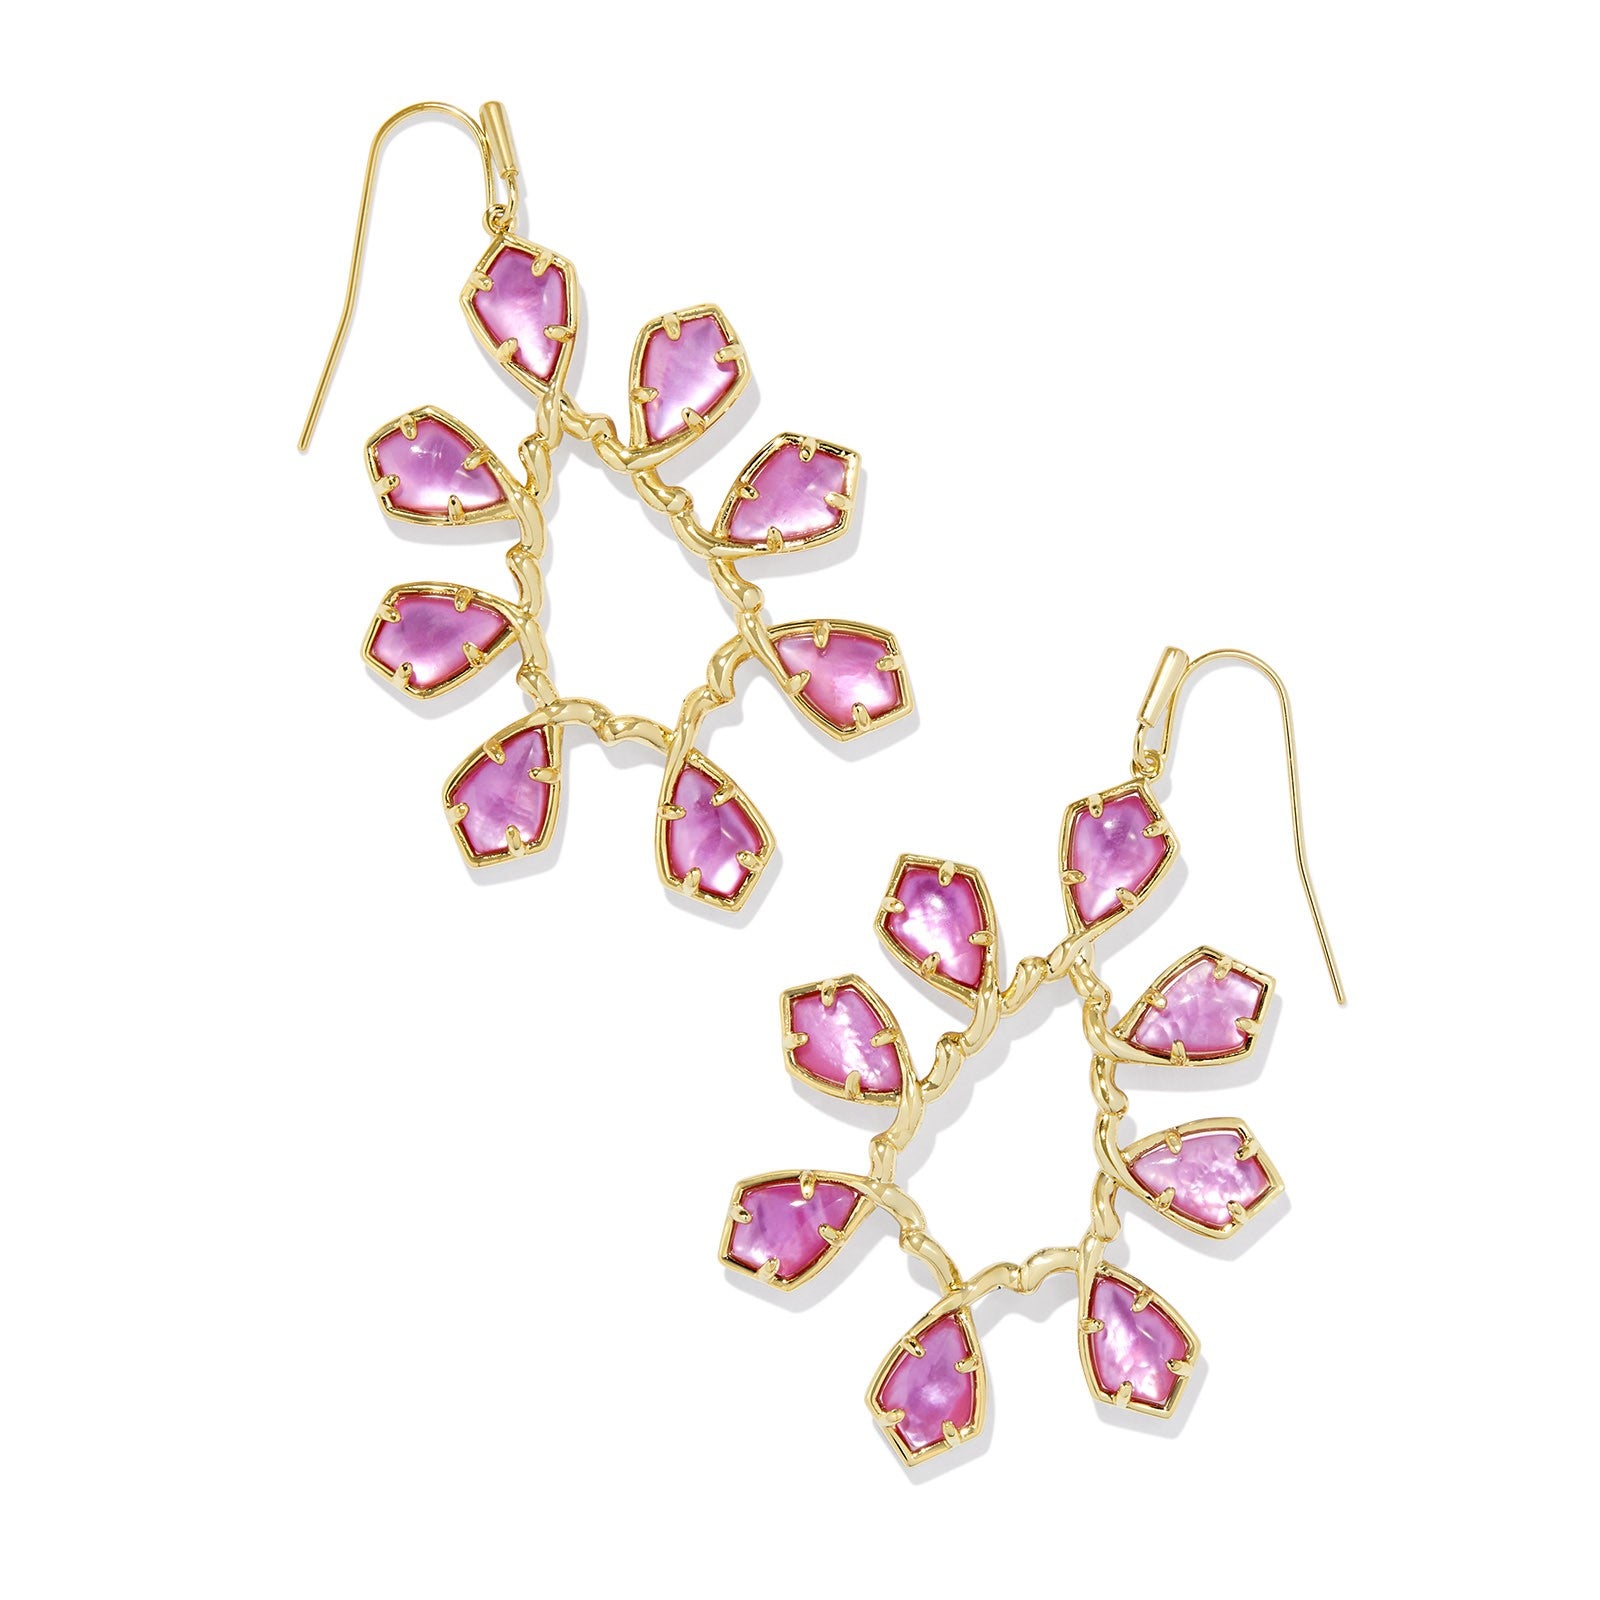 Kendra Scott | Camry Gold Open Frame Drop Earrings in Azalea Illusion - Giddy Up Glamour Boutique